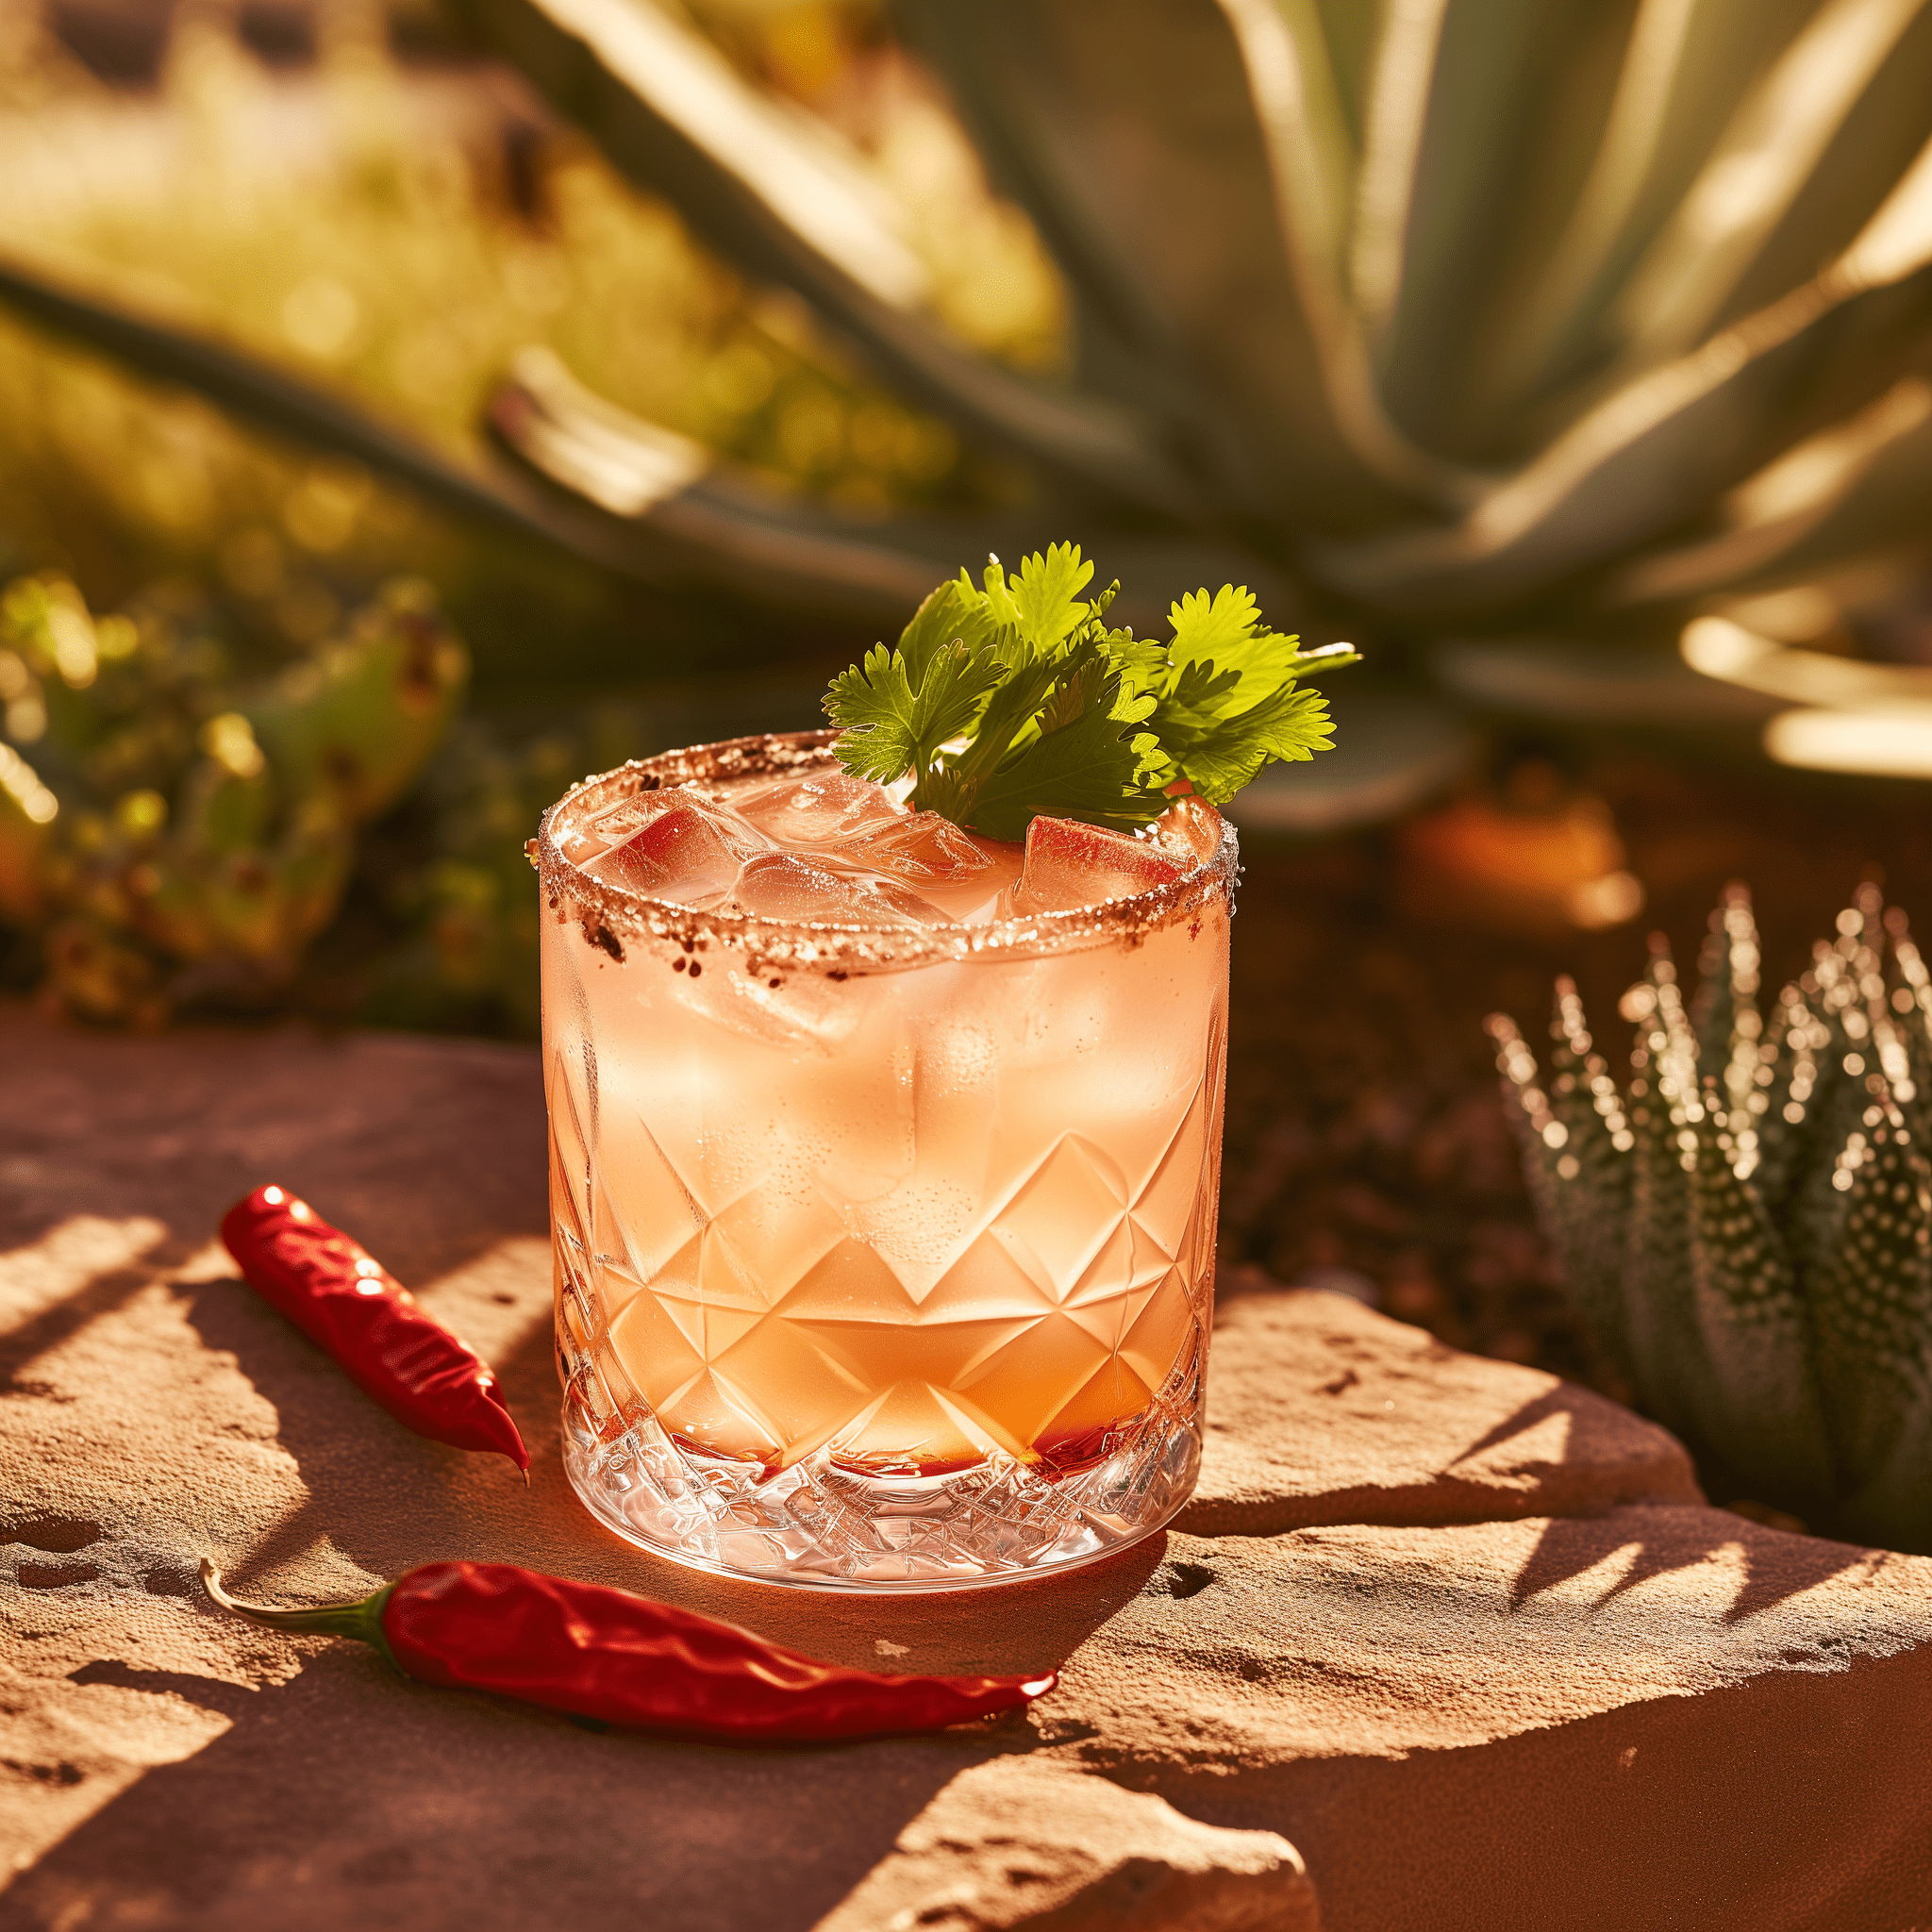 Vida Paloma Cocktail Recipe - The Vida Paloma offers a smoky undertone from the mezcal, balanced with the tartness of grapefruit and a hint of sweetness from the simple syrup. The lime juice adds a refreshing acidity, and the club soda provides a fizzy lift, making it a well-rounded and invigorating drink.